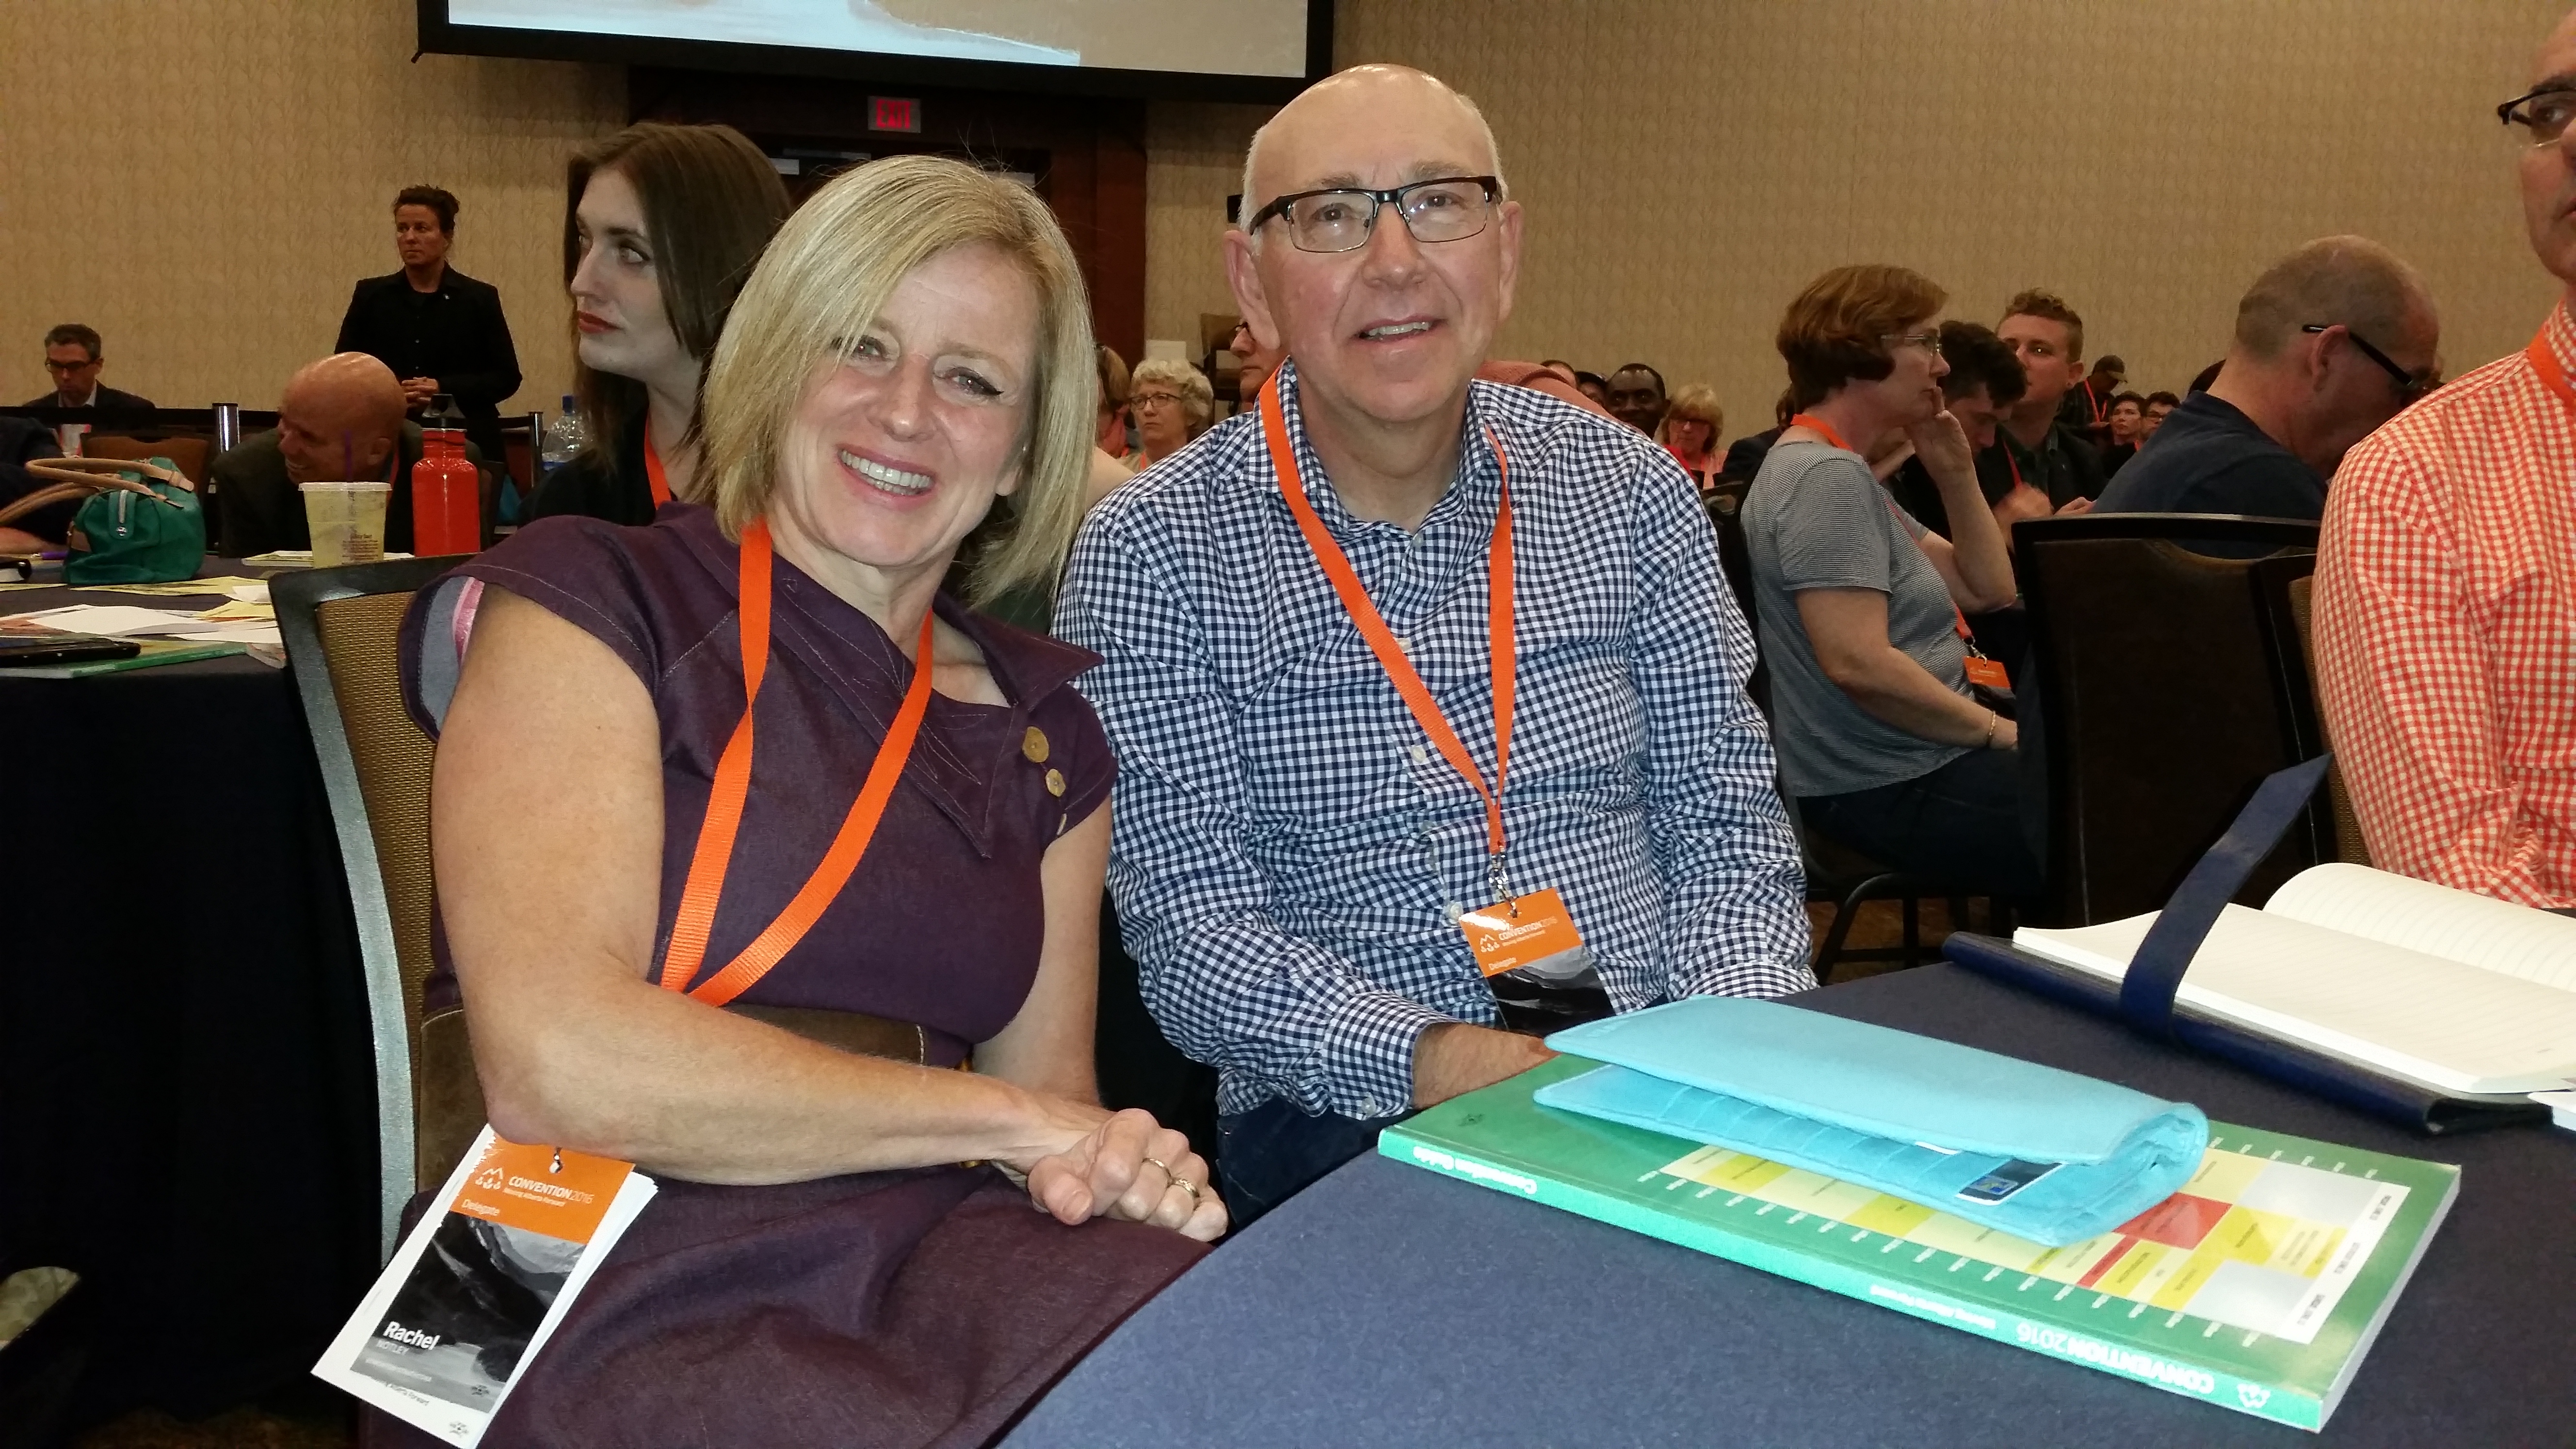 My time at Alberta NDP convention